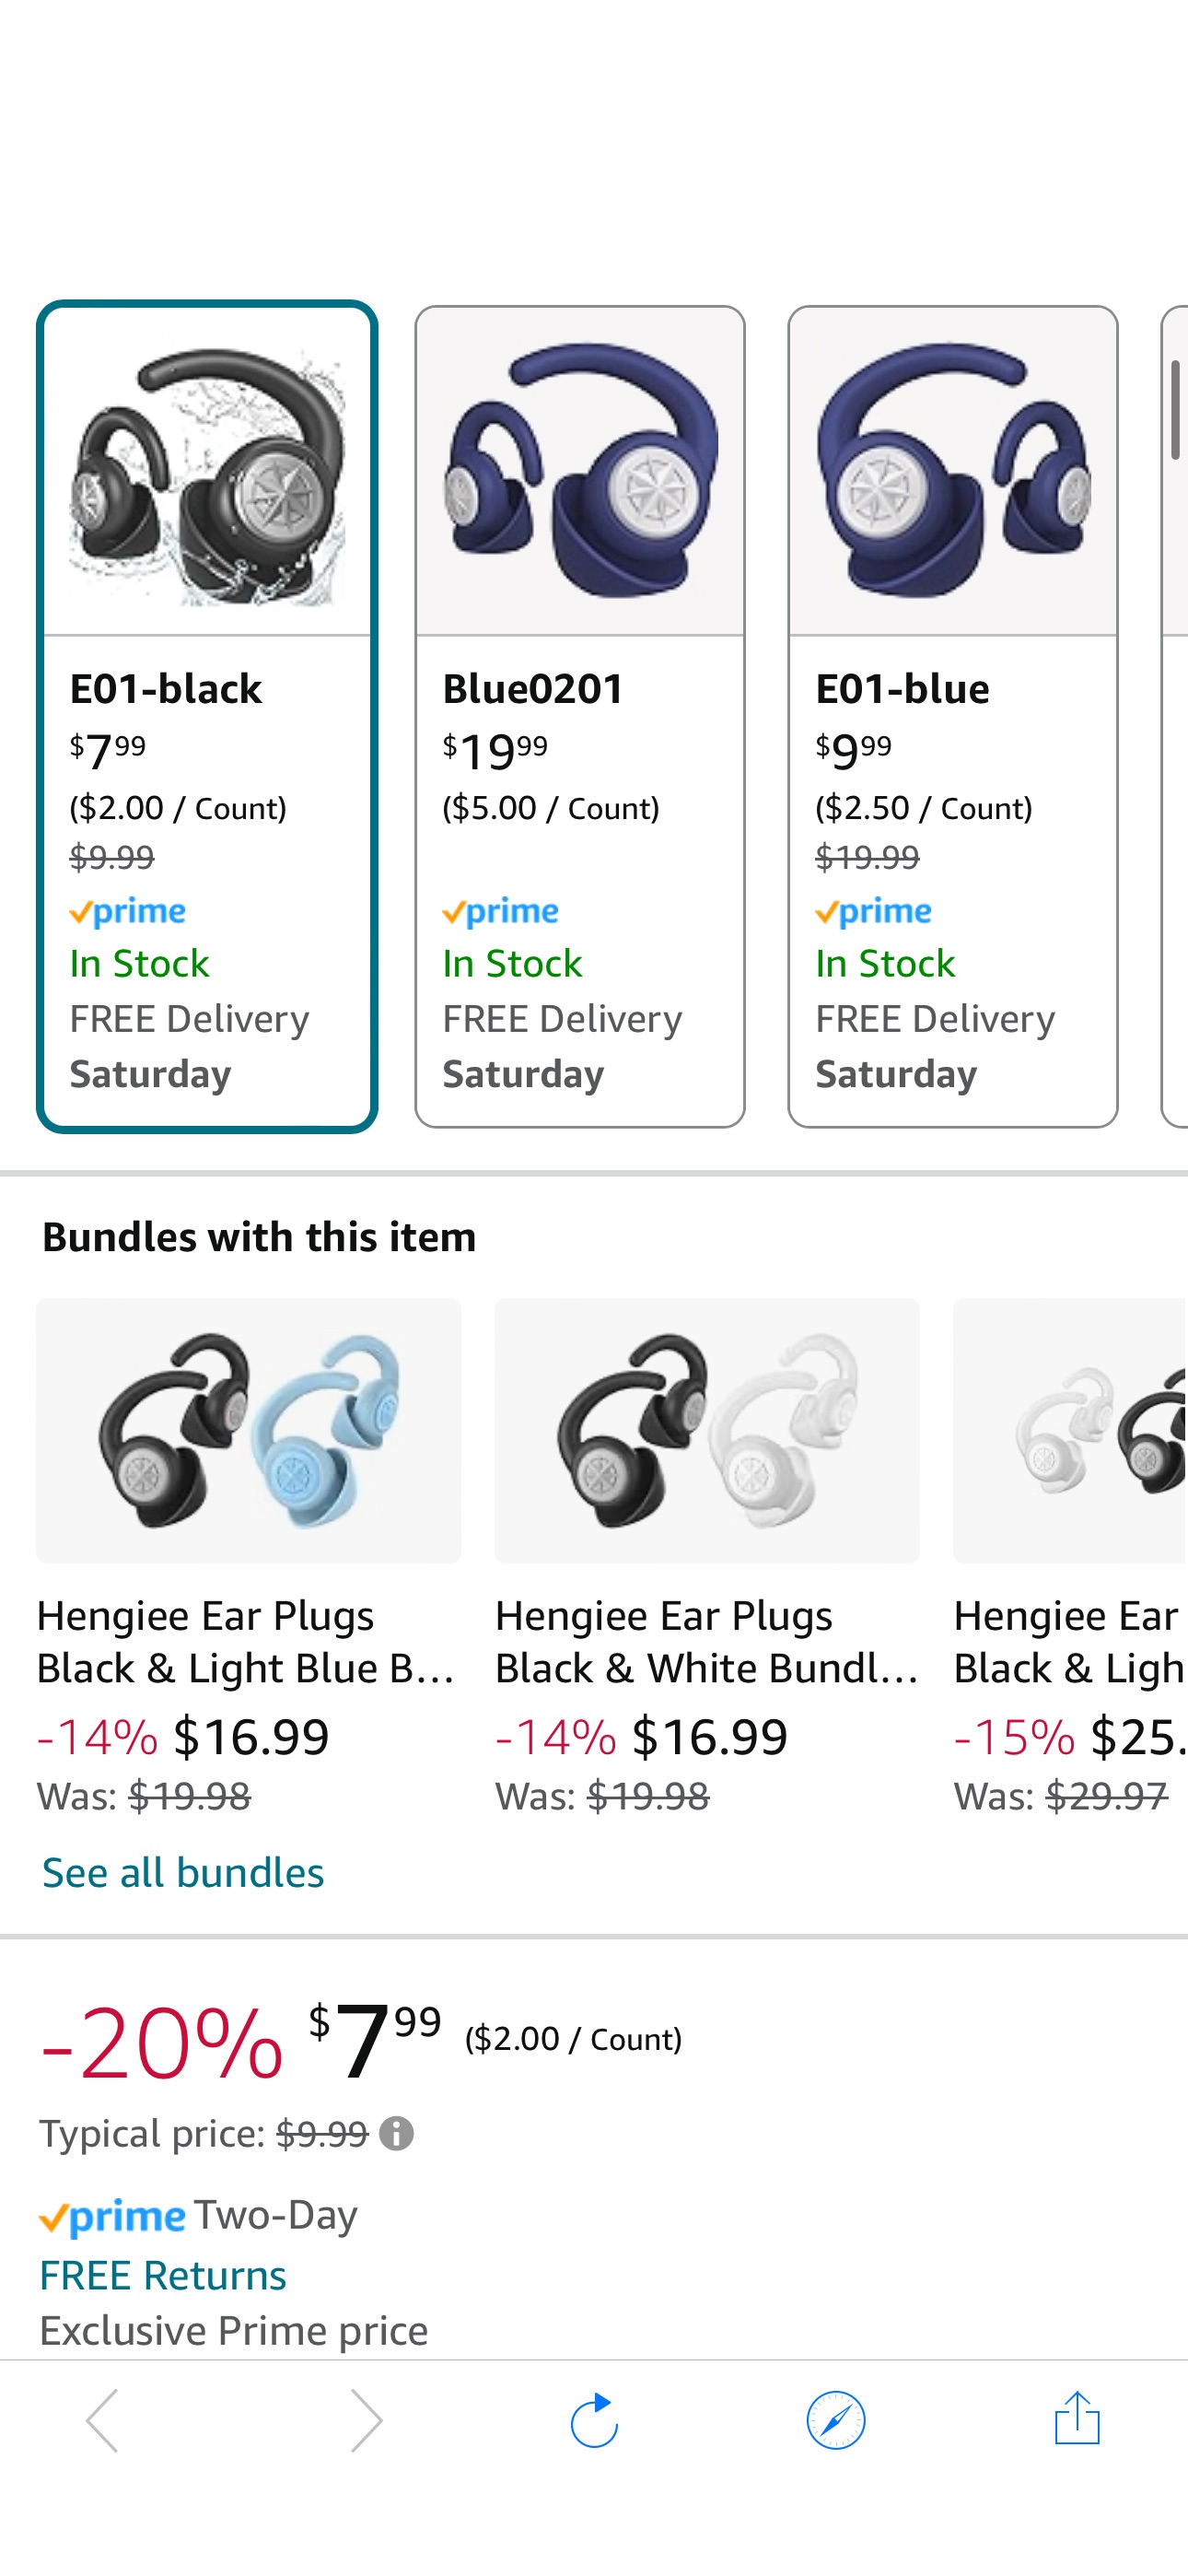 Amazon.com: Hengiee Ear Plugs for Sleeping - NRR33dB Noise Reduction Earplugs for Sleep, Airplane, 2 Pairs of Hengiee Ear Plugs ONLY $3.99 for Prime Members! 
Use code S85GEMNI at checkout